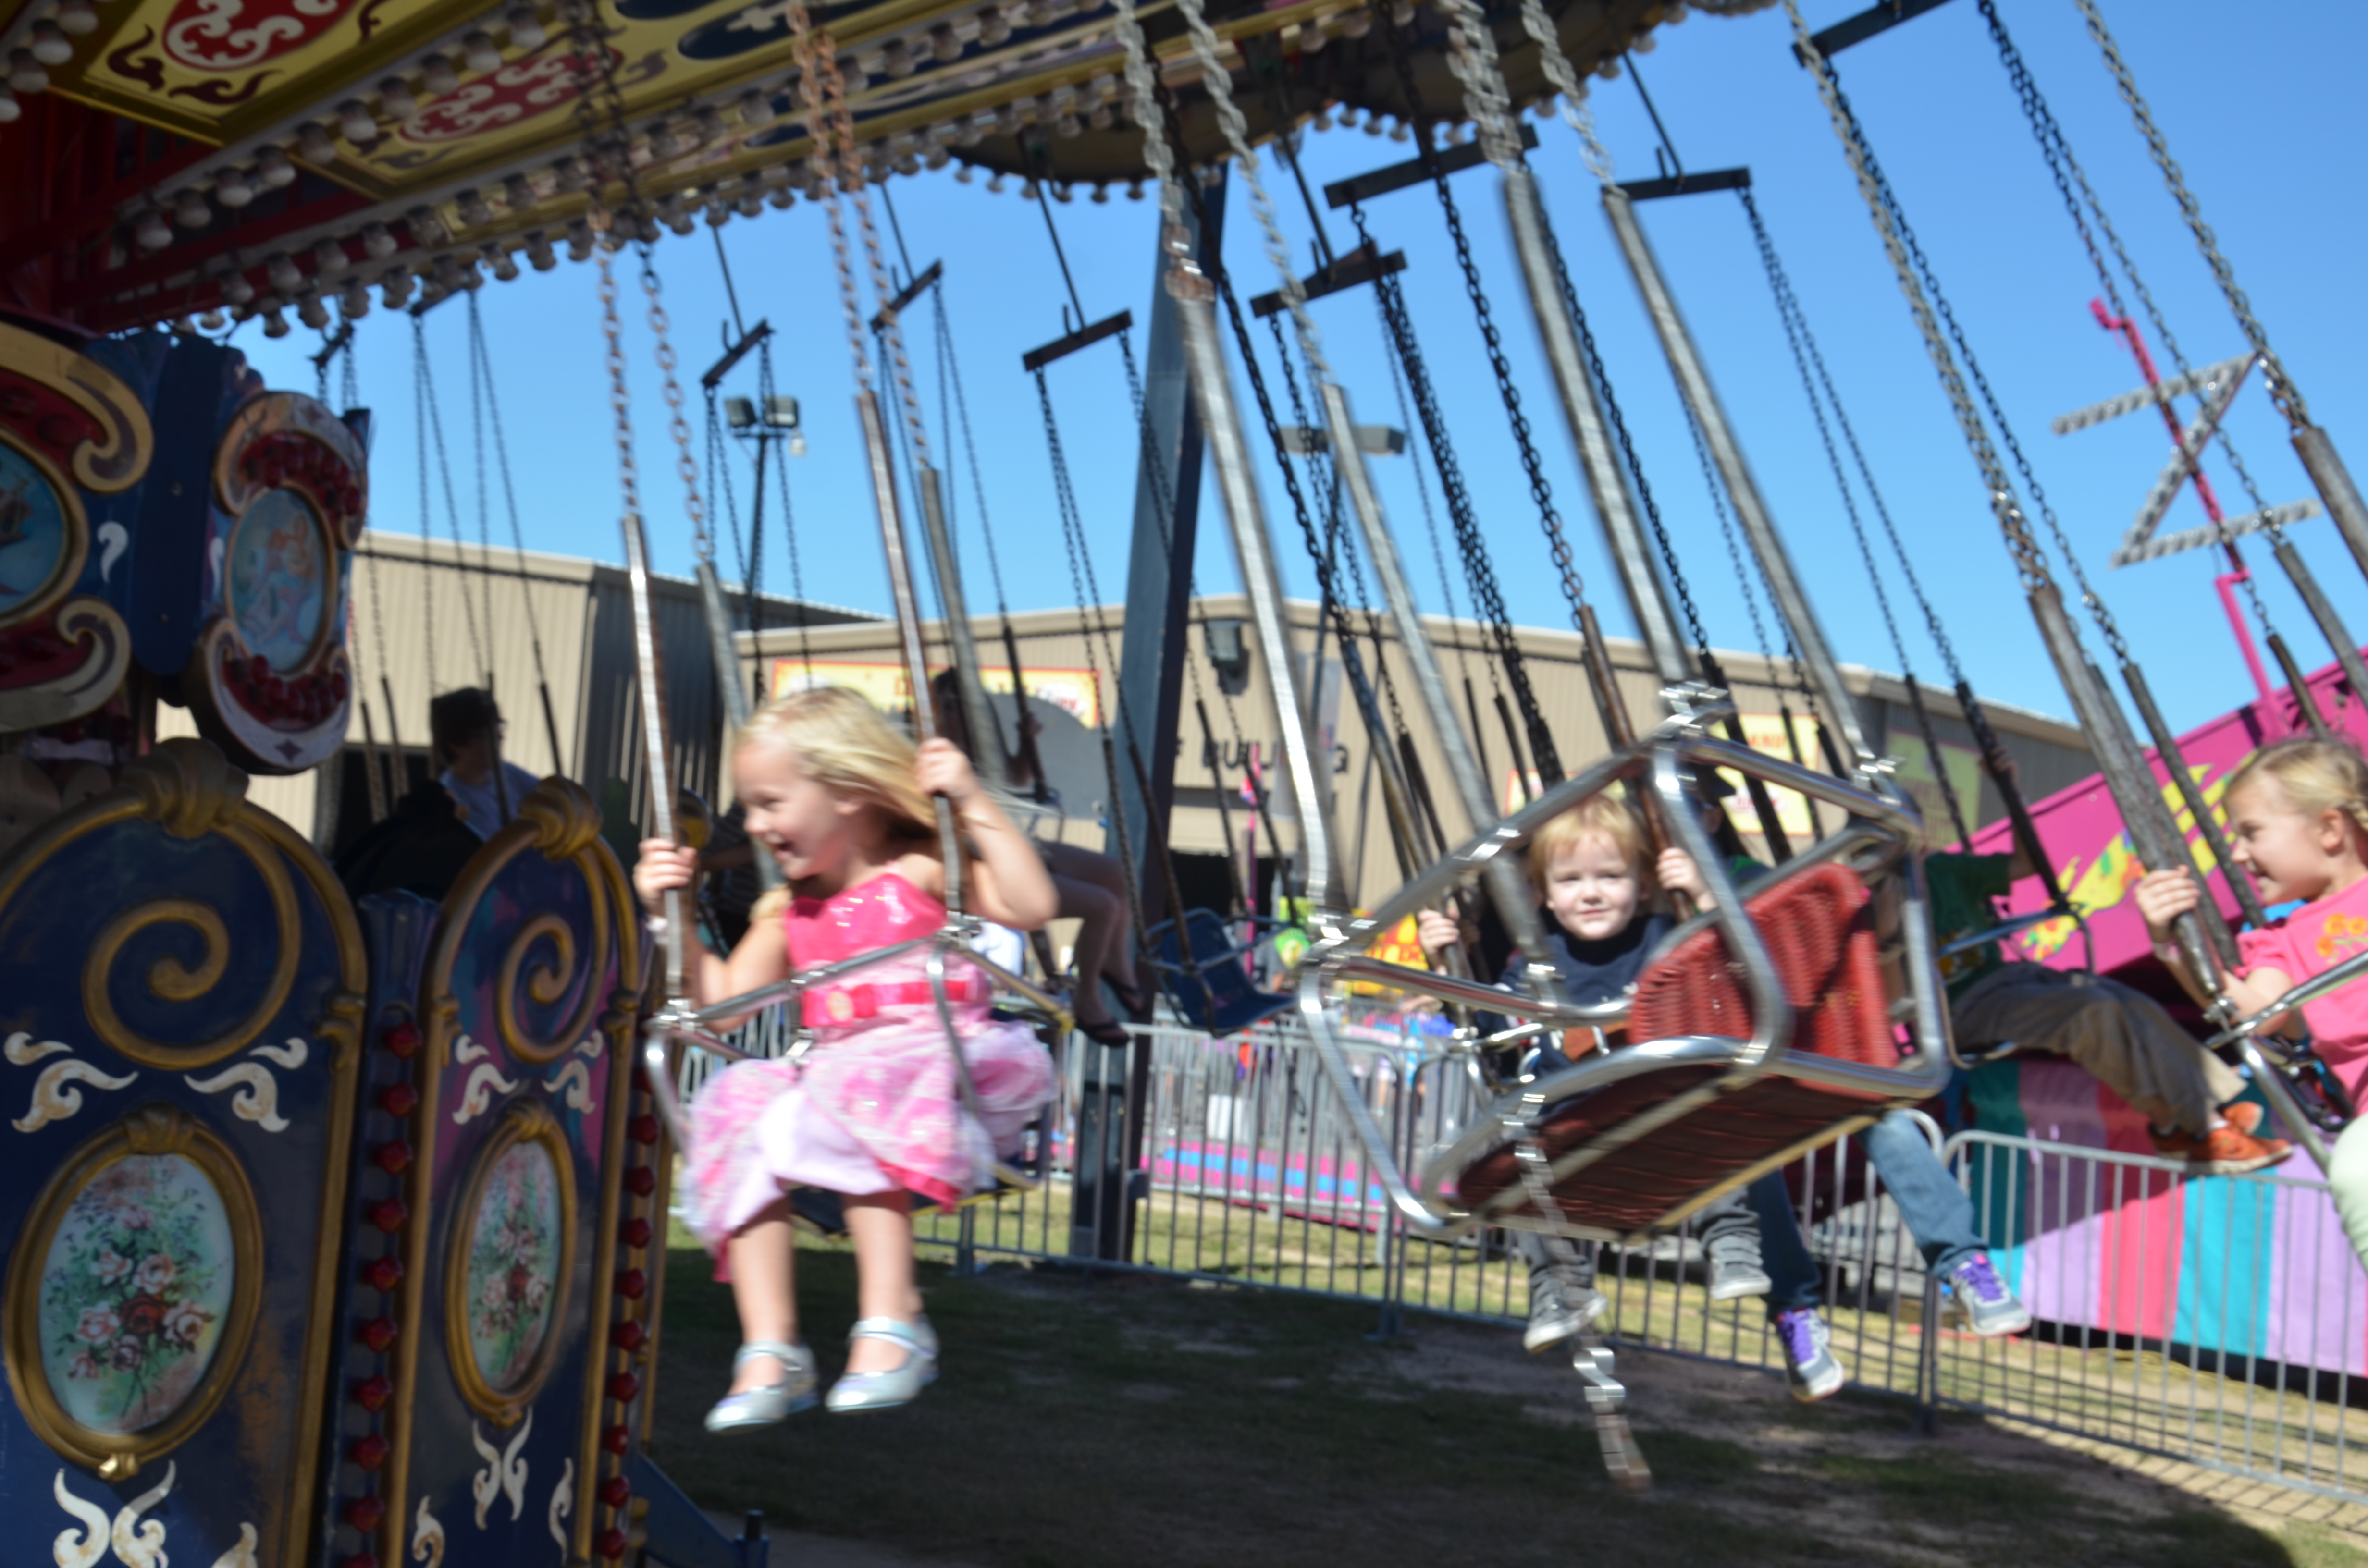 SC State Fair Attracts Nearly 475,000